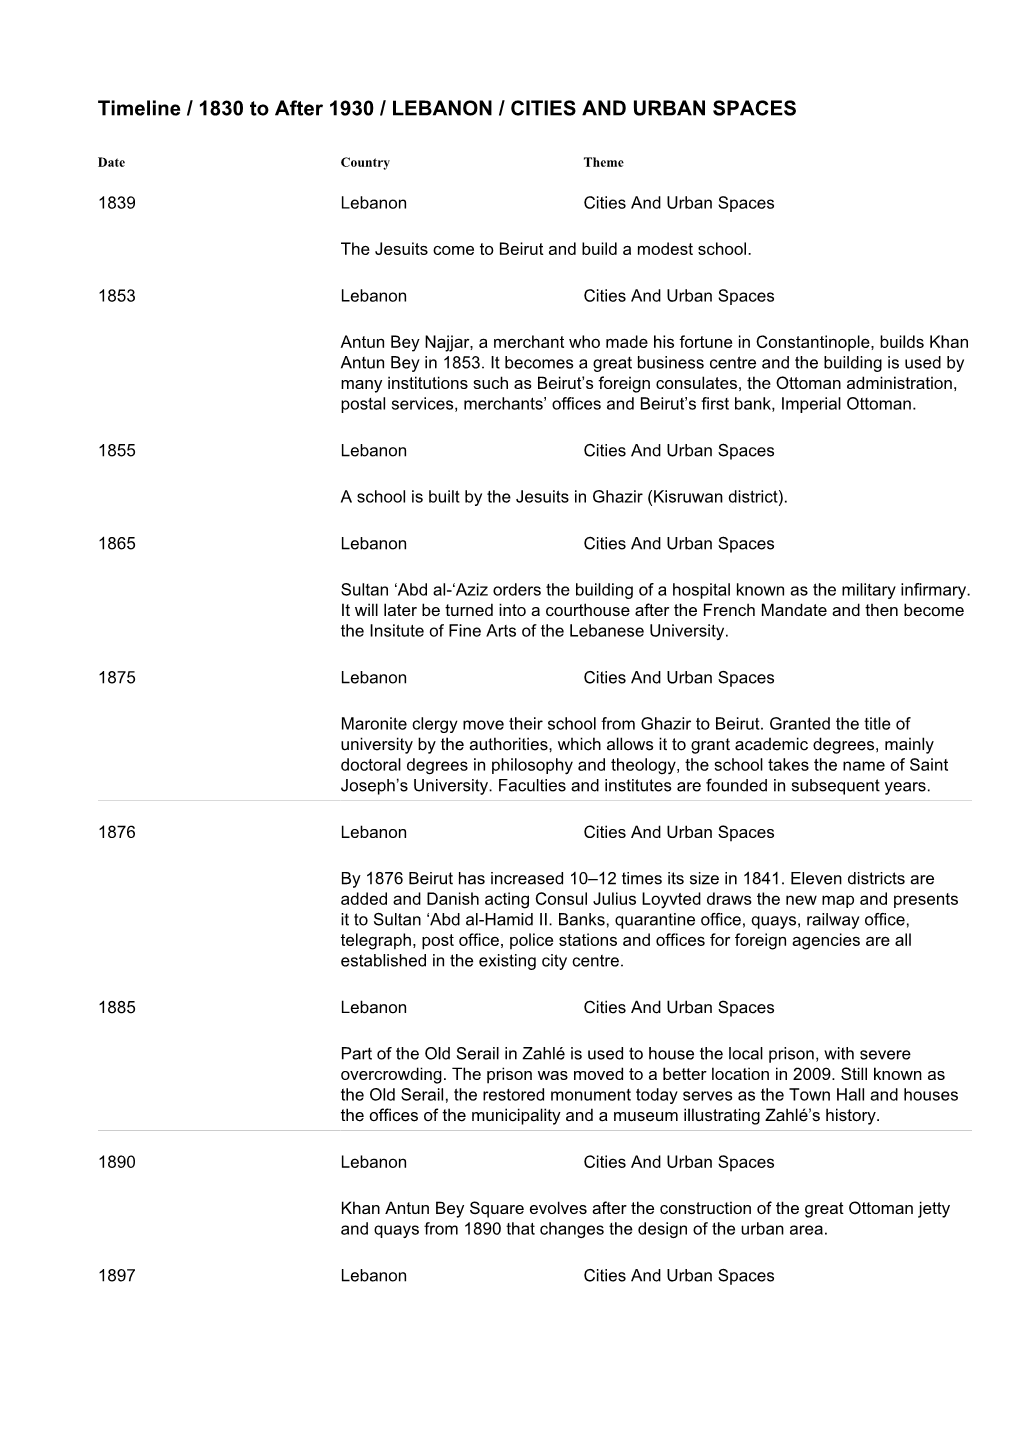 Timeline / 1830 to After 1930 / LEBANON / CITIES and URBAN SPACES